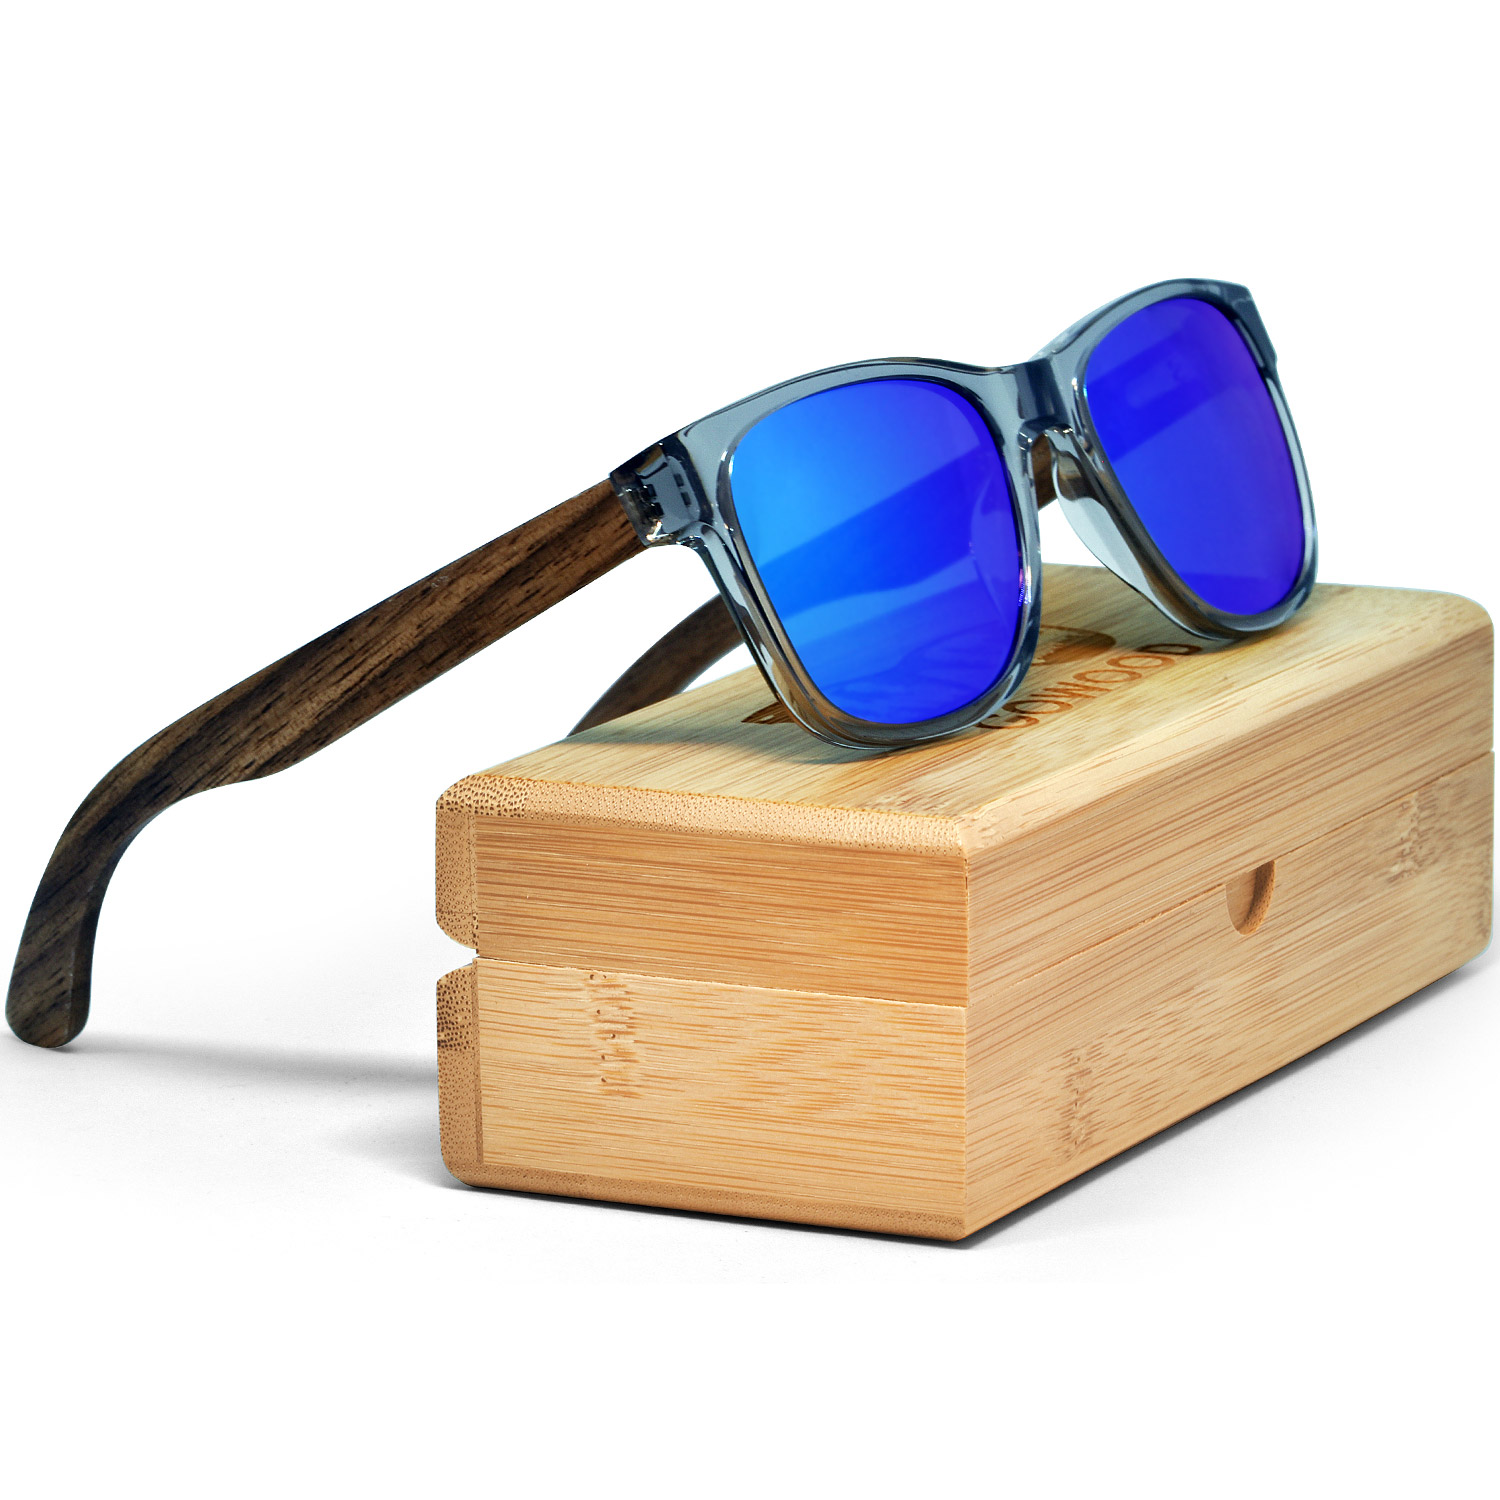 Walnut wood sunglasses classic style transparent frame with blue lenses bamboo box